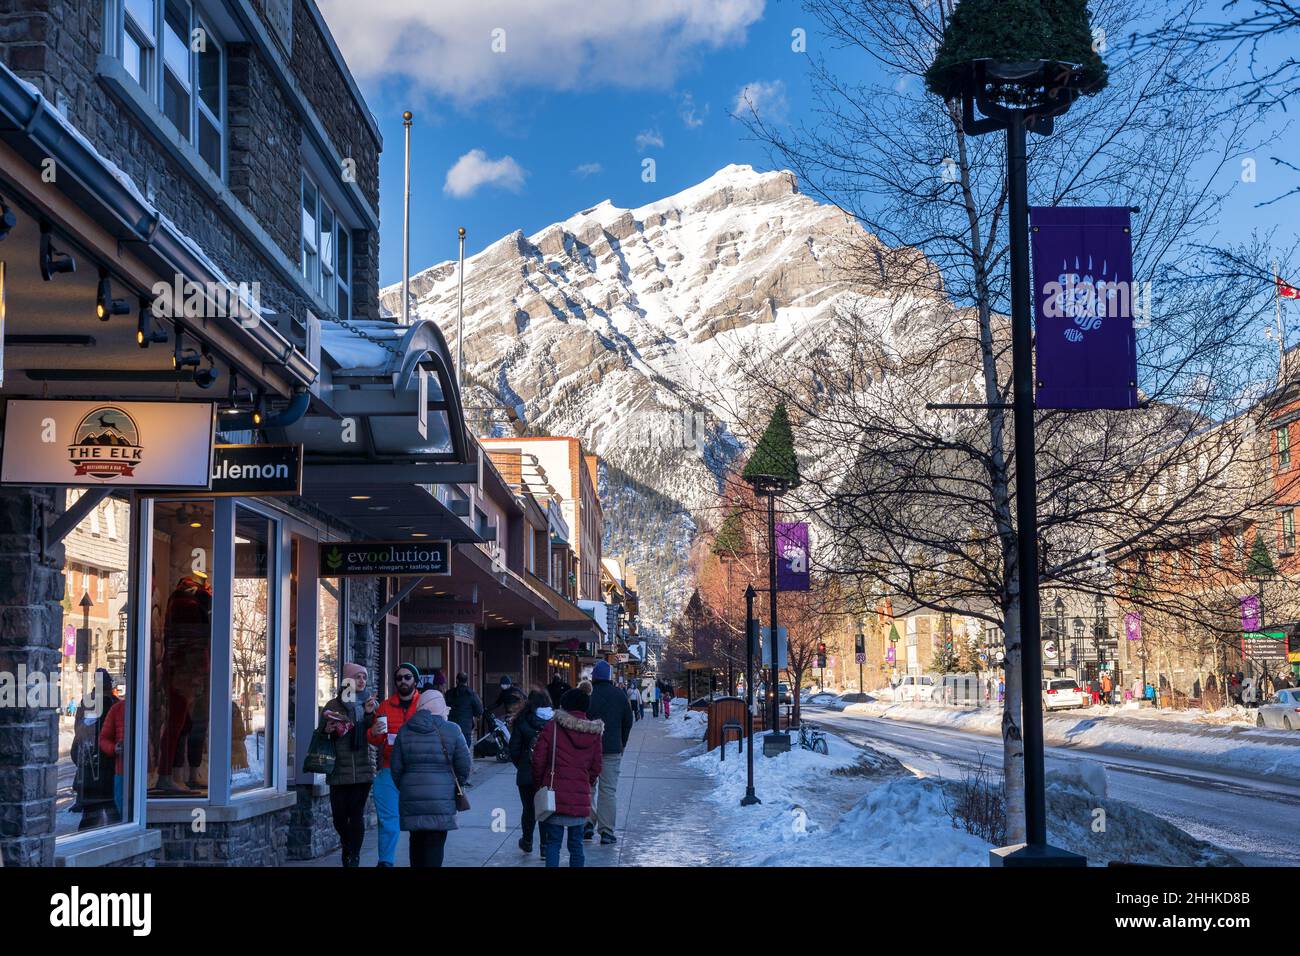 Banff, Alberta, Canada - January 23 2022 : Tourists shopping on Banff Avenue in winter during covid-19 pandemic period. Stock Photo